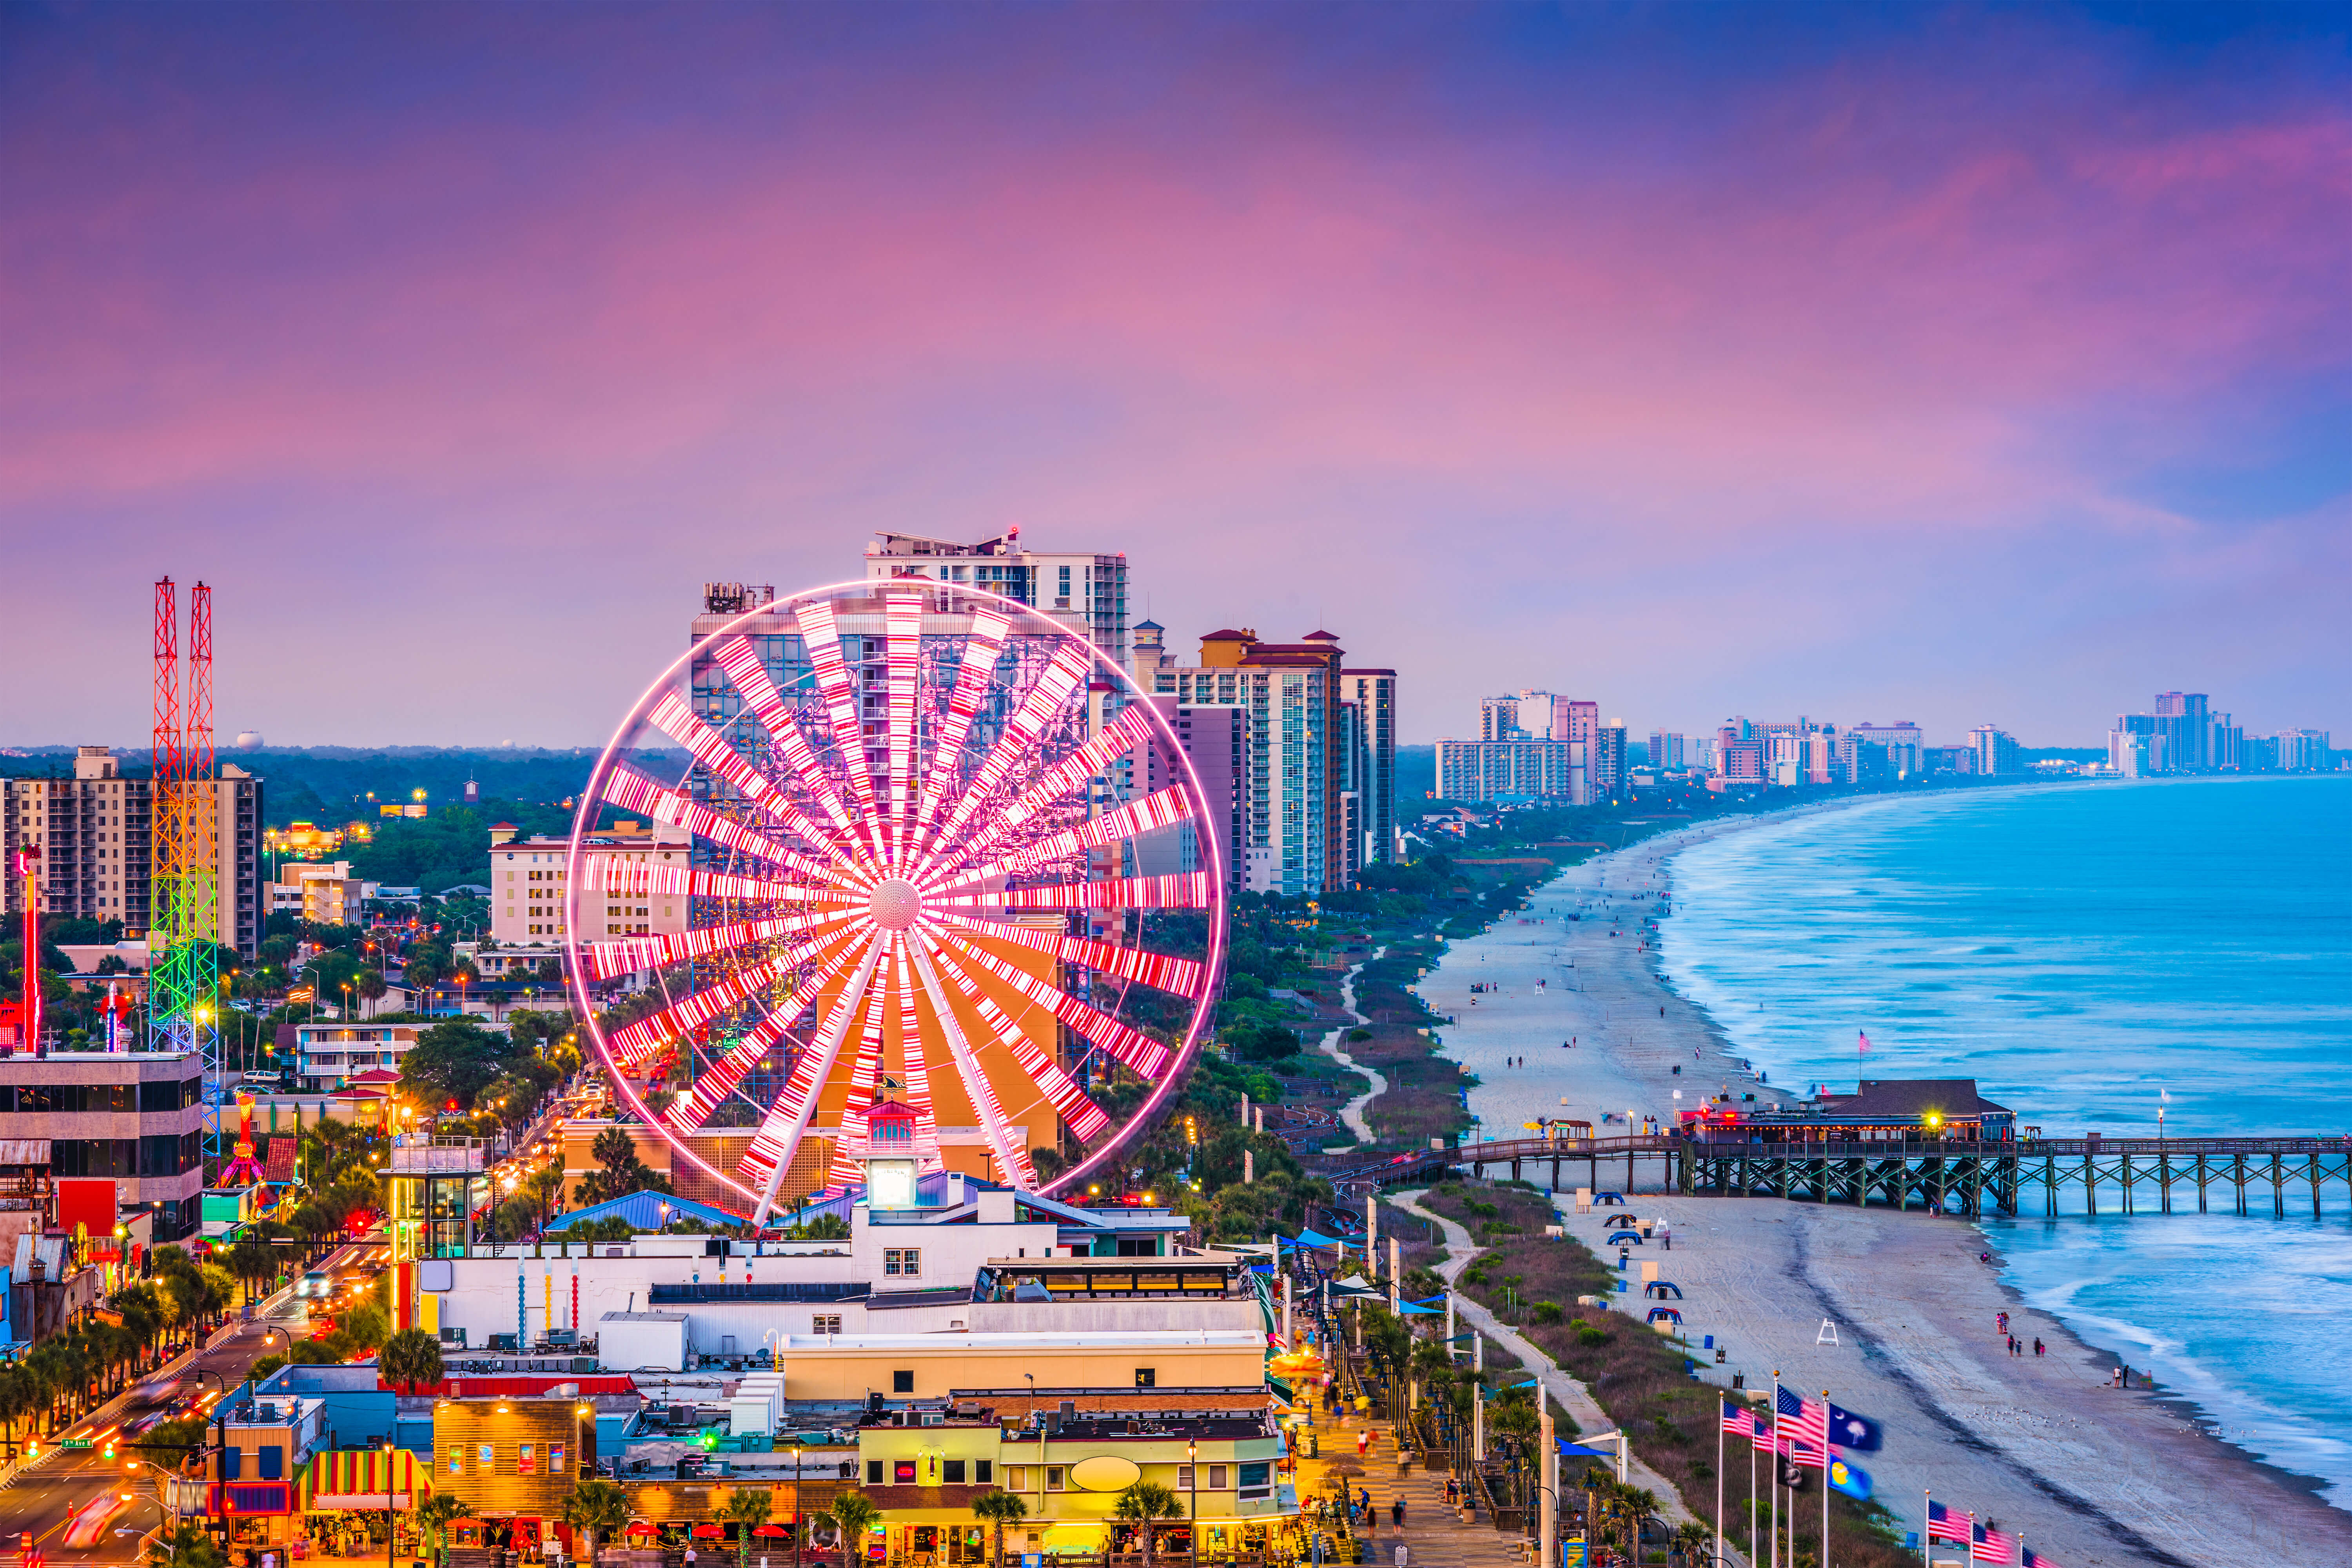 One of the best beaches near Charlotte, NC is Myrtle Beach